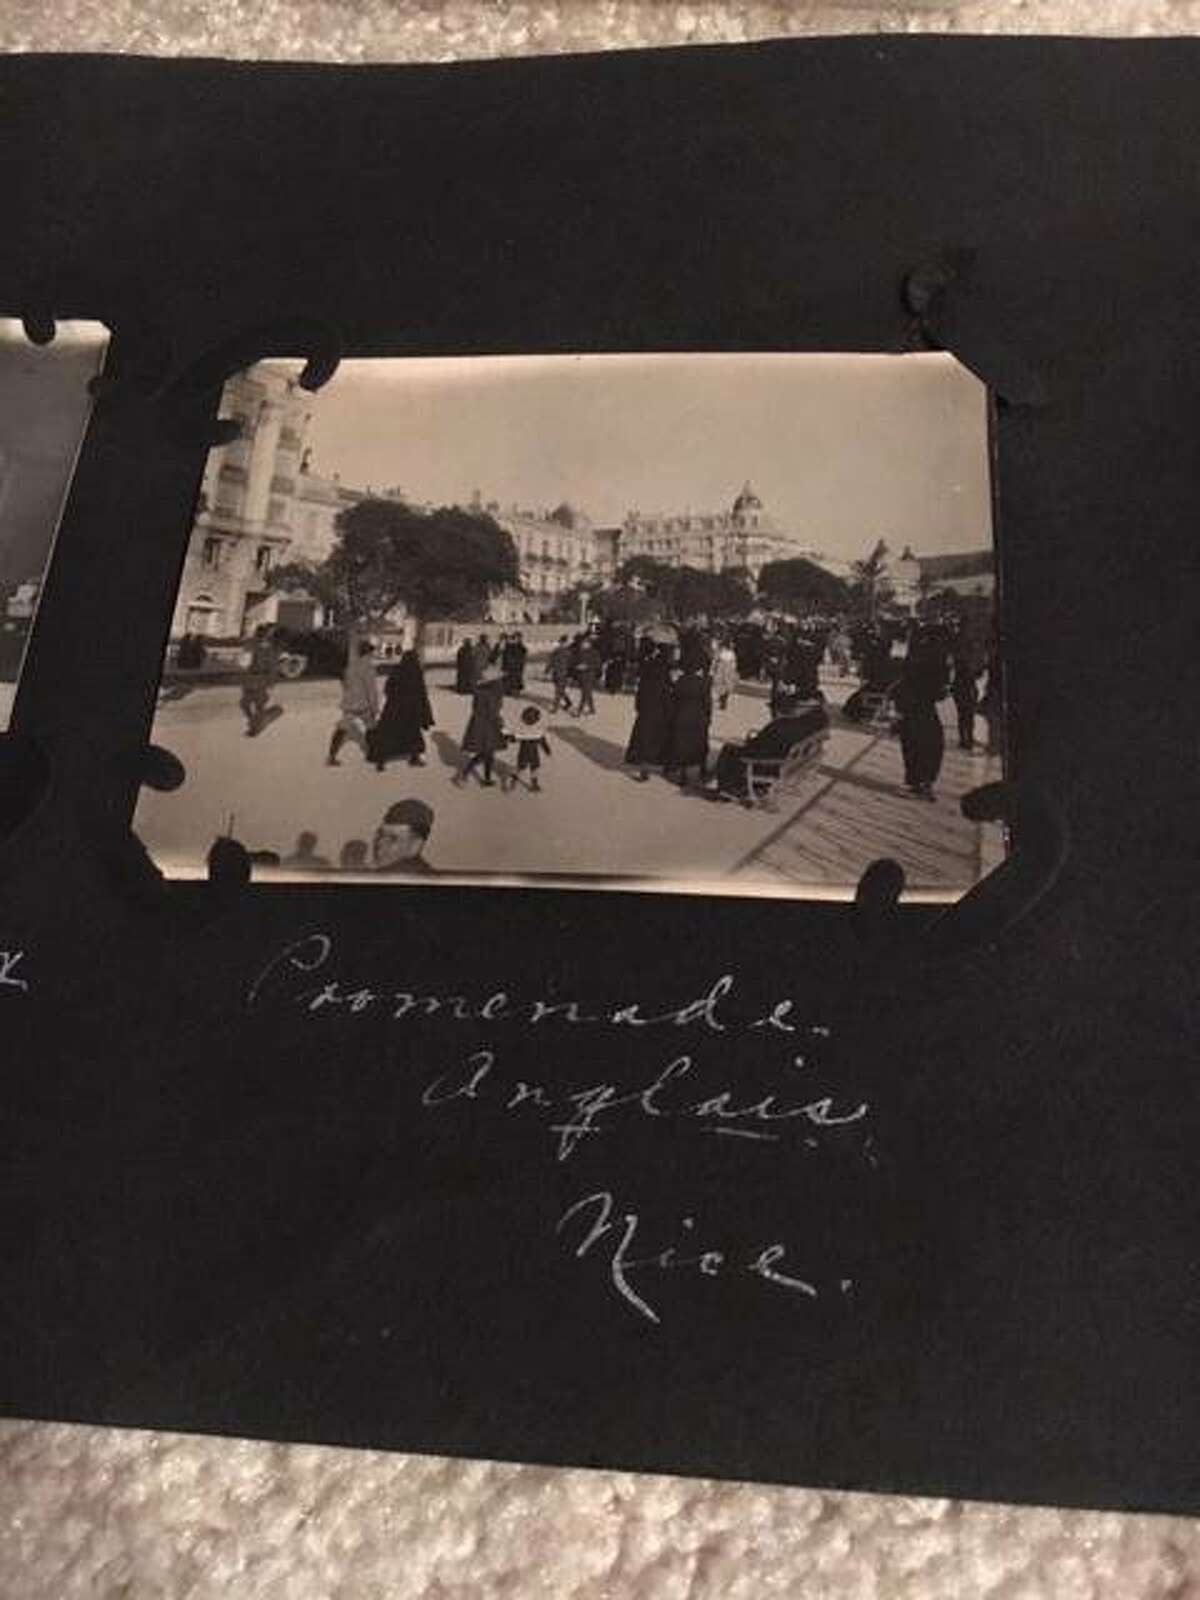 U.S. soldier Joseph Bosque of San Francisco made this photo of the Promenade Anglais in Nice, France while deployed to France during WW I. Bosque penned a series of love letters to his then-girlfriend Annie Corbett, who awaited his return from war. Bosque, deployed in a non-combat mission, did return to San Francisco, where he married Corbett.